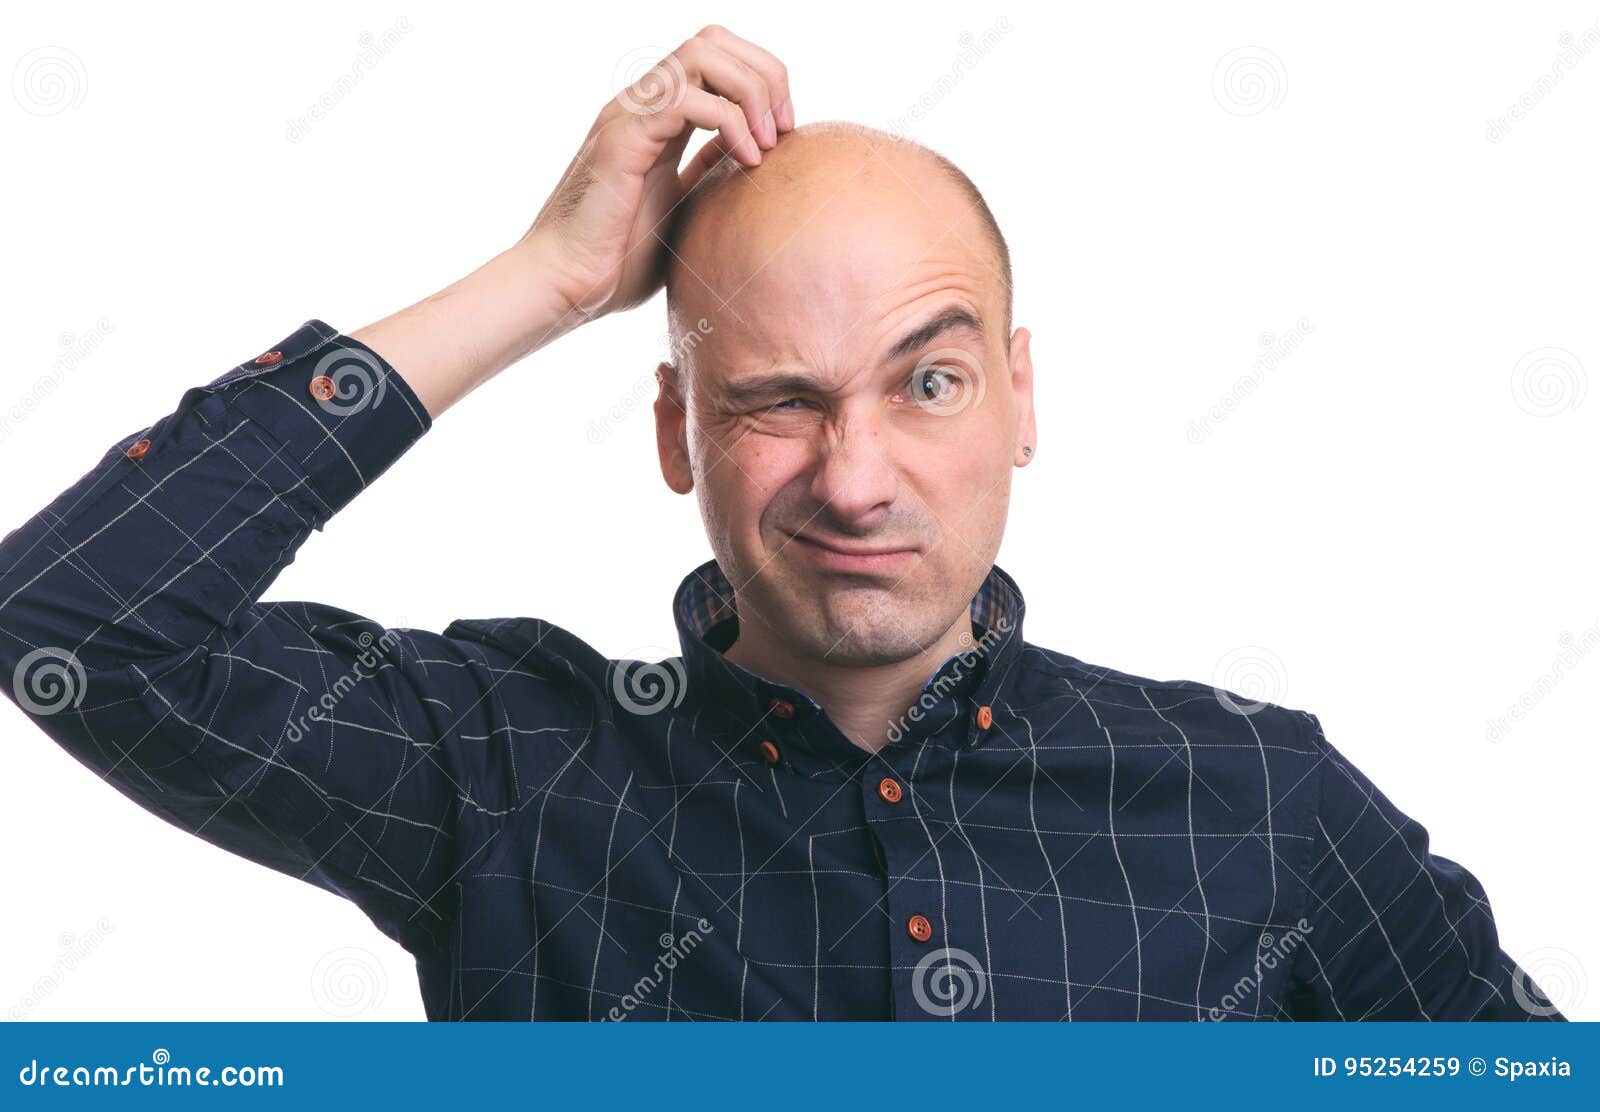 confused bald guy scratch his head